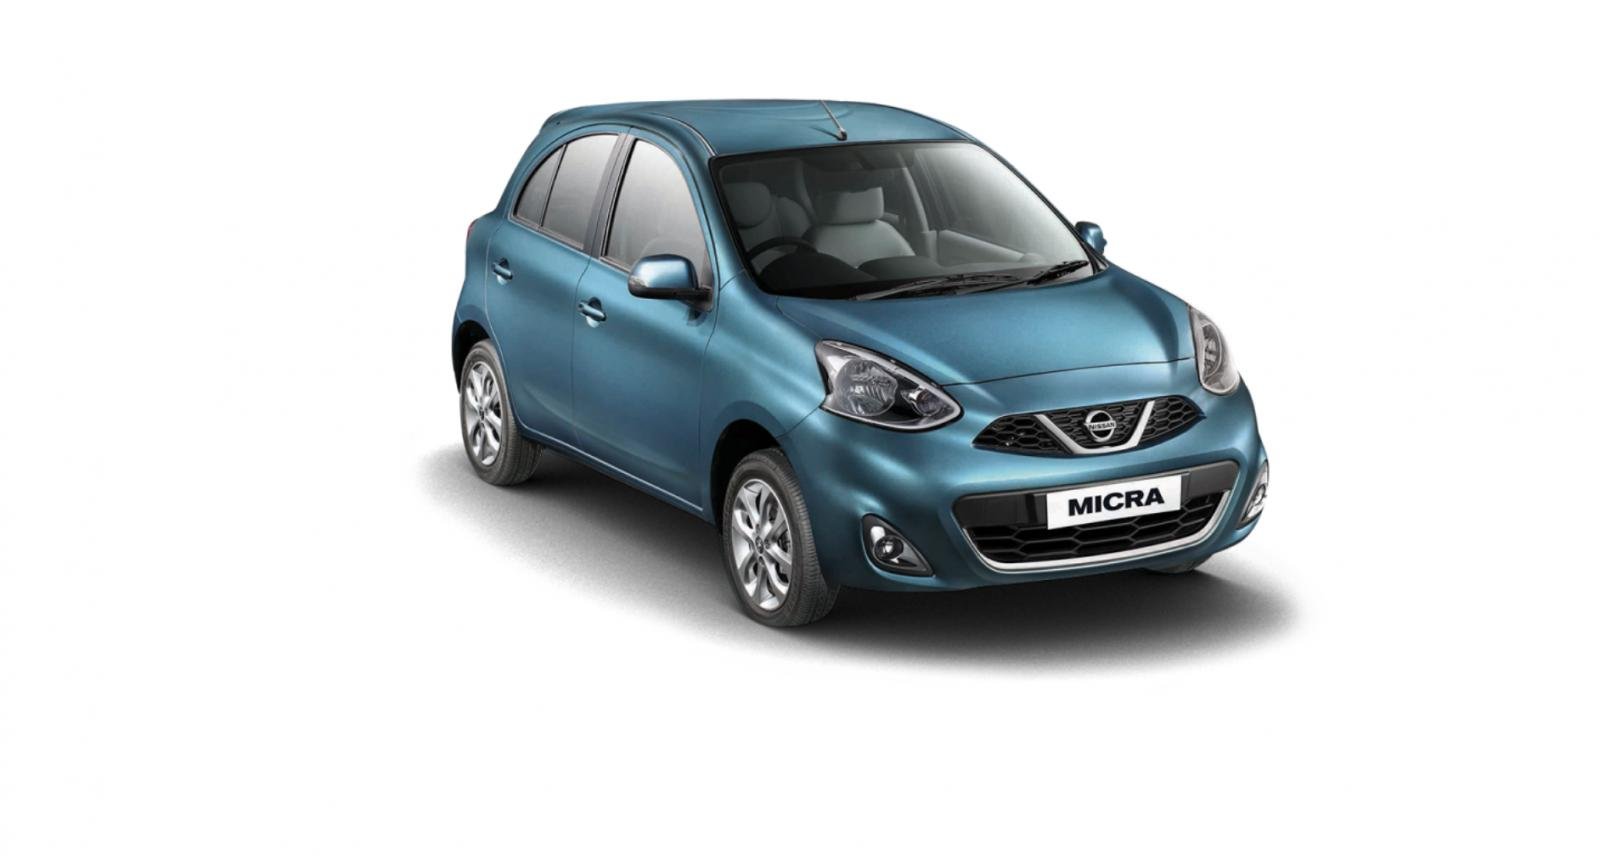 Nissan Micra turquoise blue